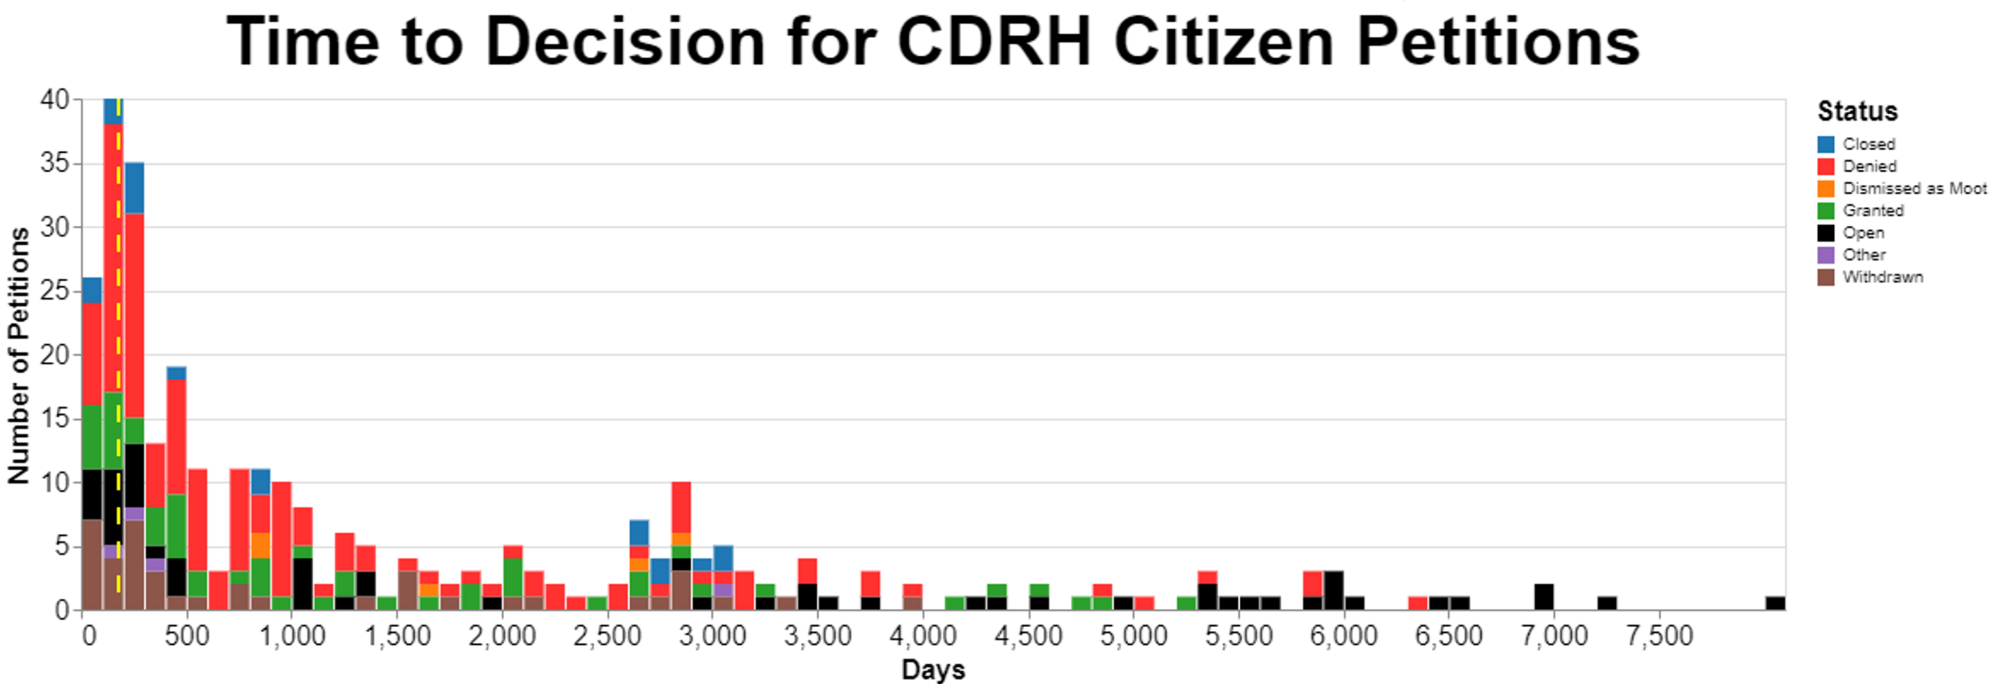 Time to Decision for CDRH Citizen Petitions